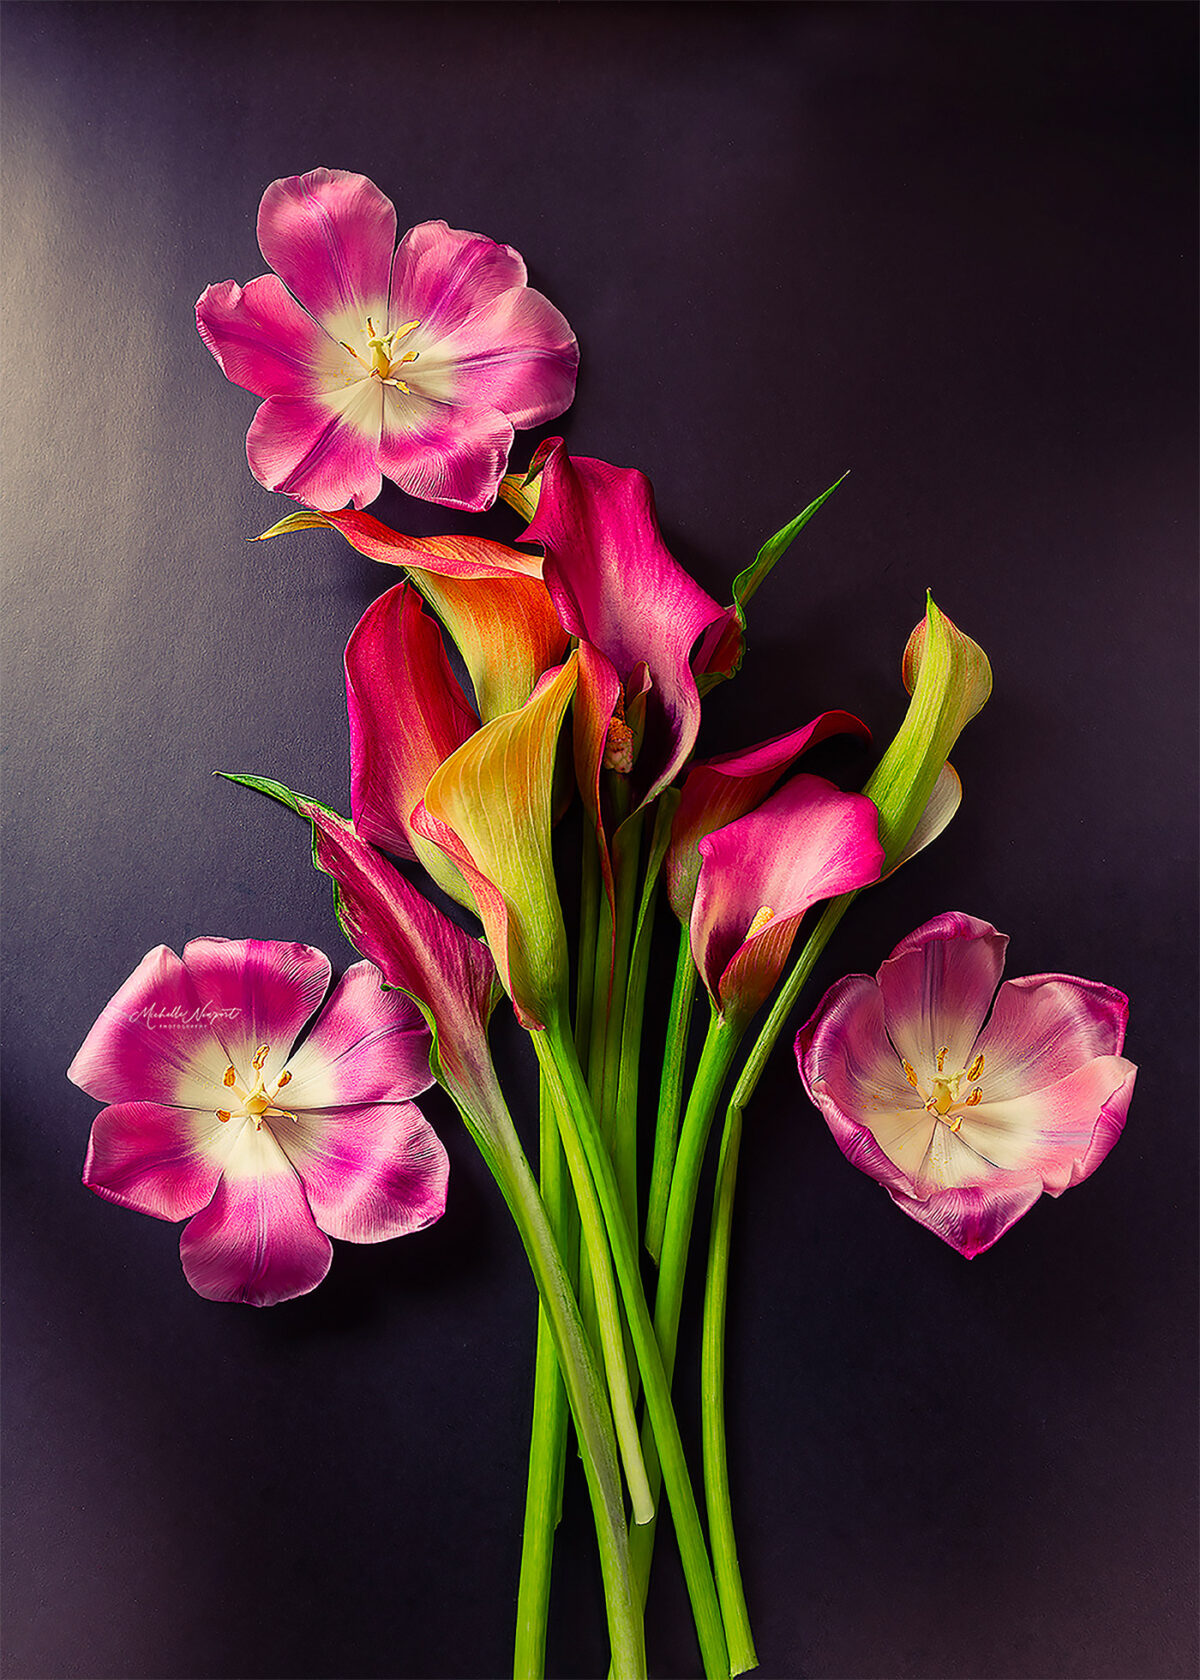 Wonderful Flower Photography By Michelle Newport 7